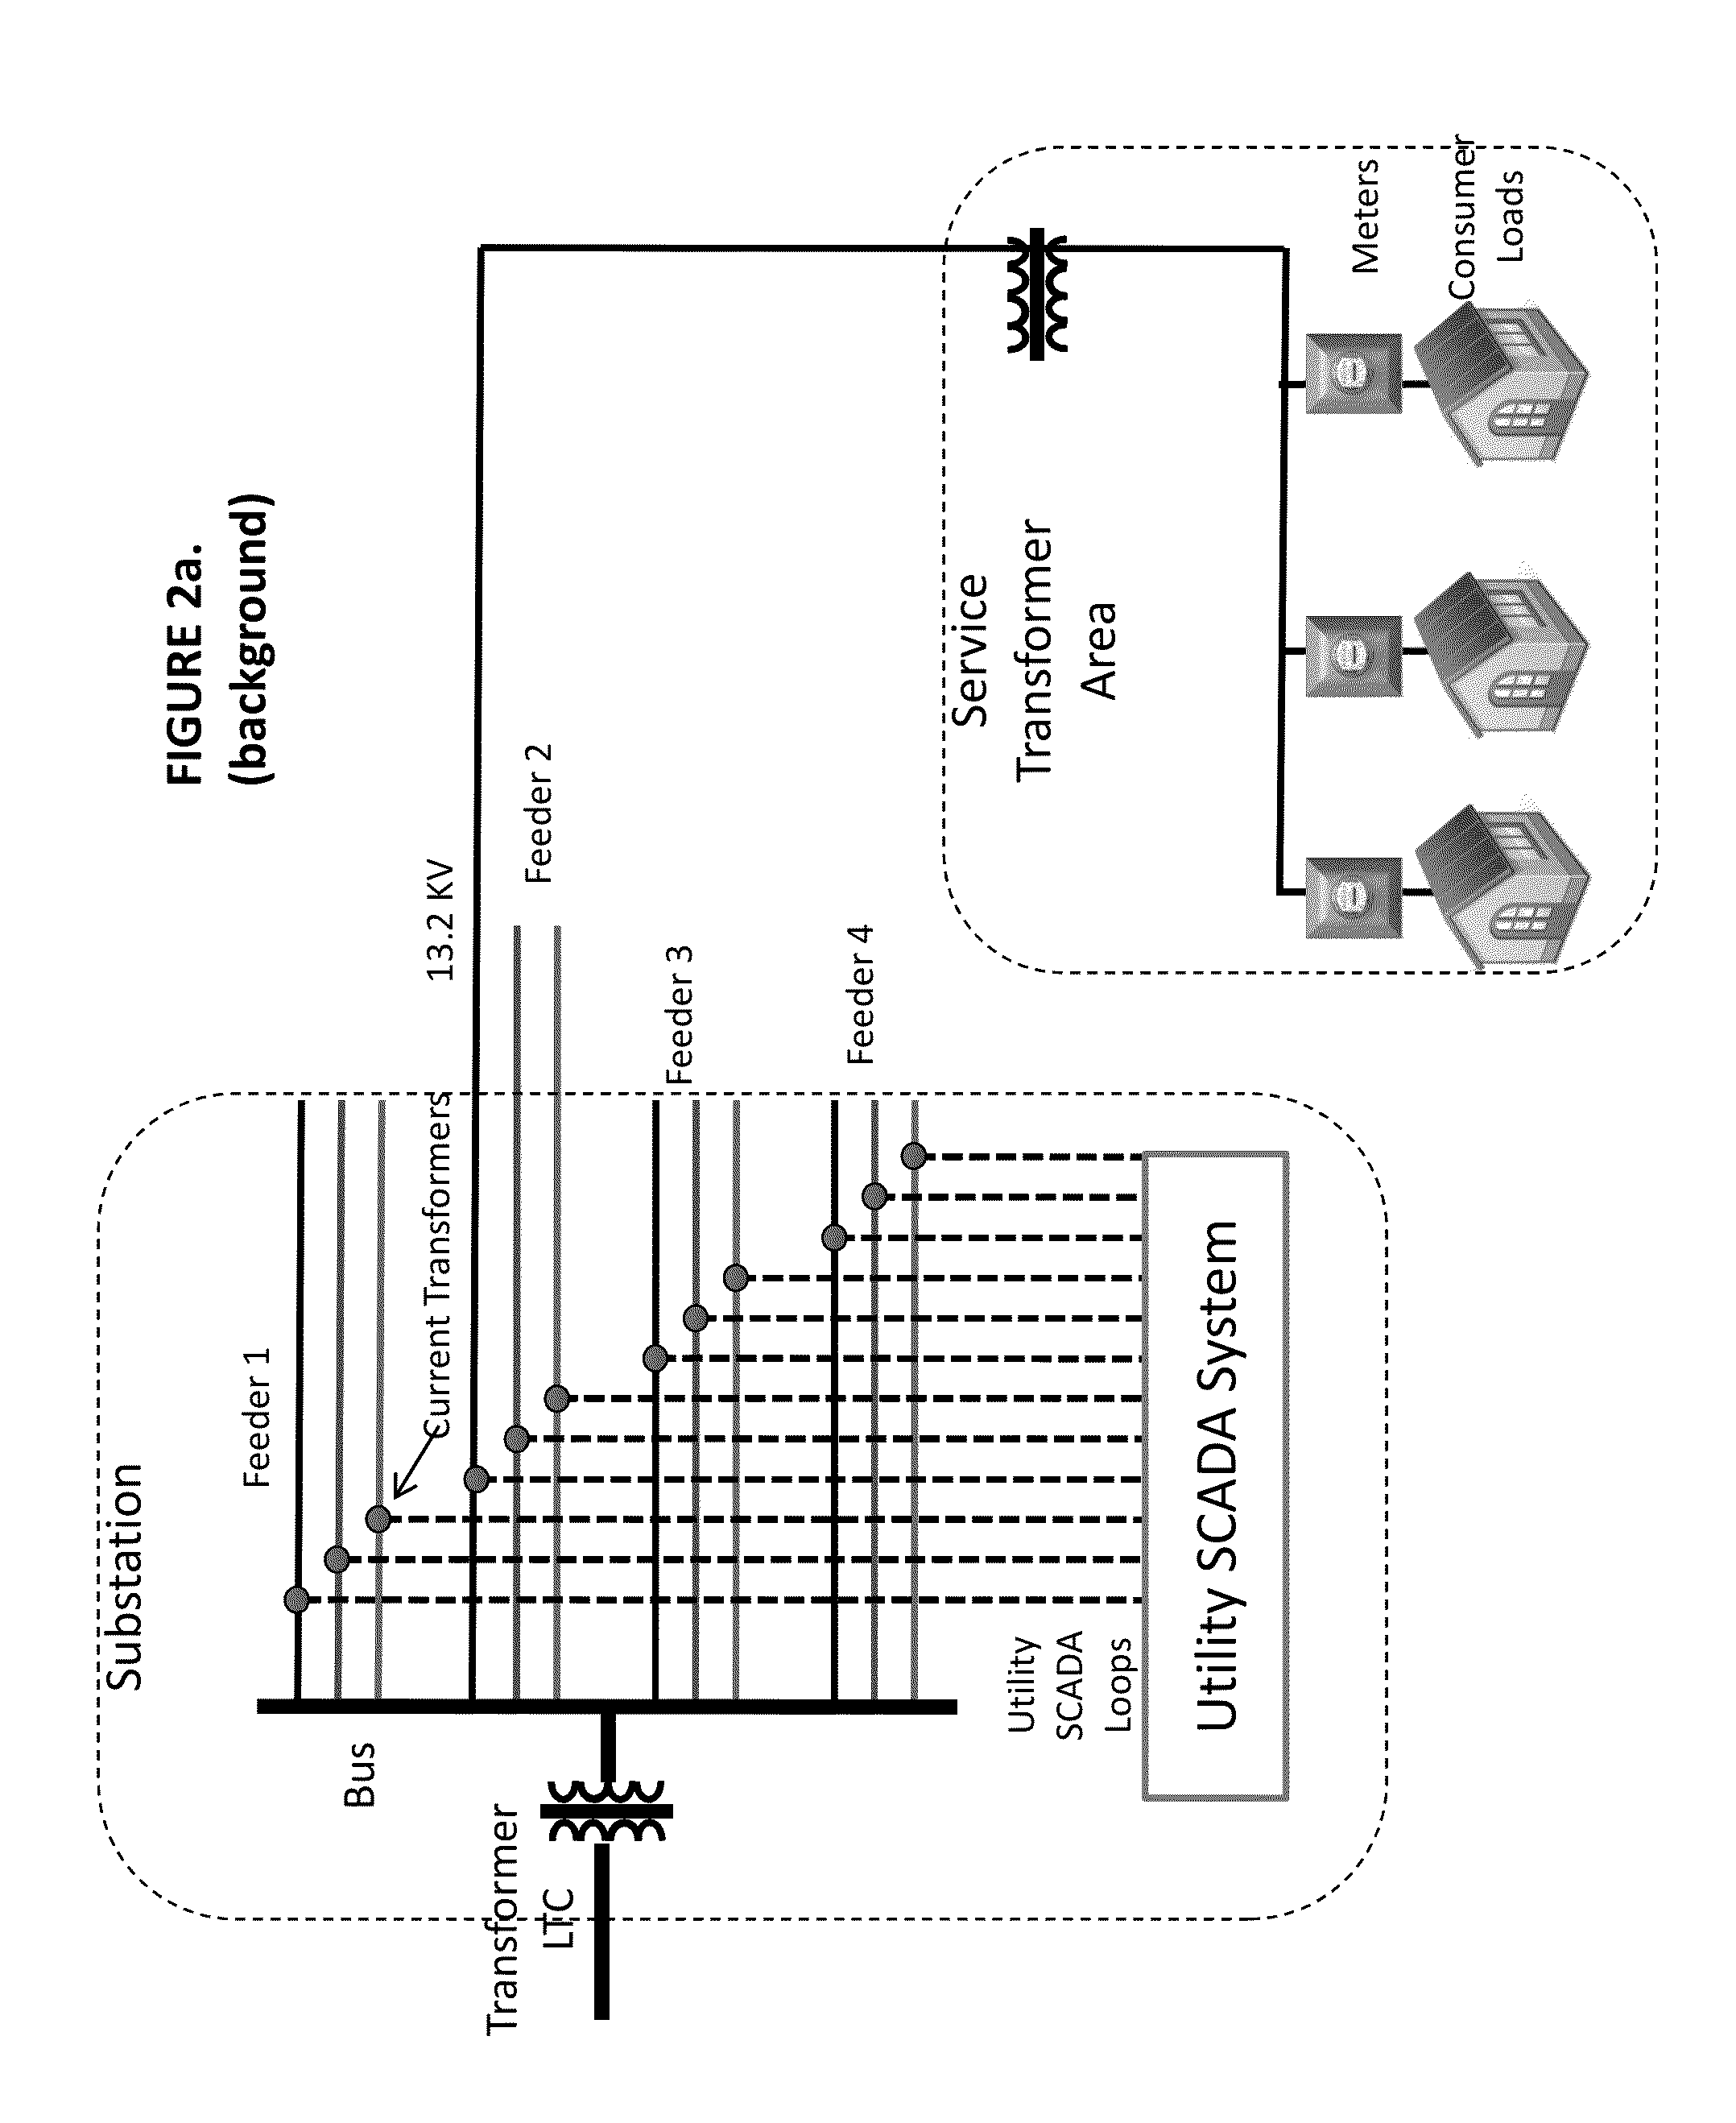 A system and method for inferring schematic and topological properties of an electrical distribution grid